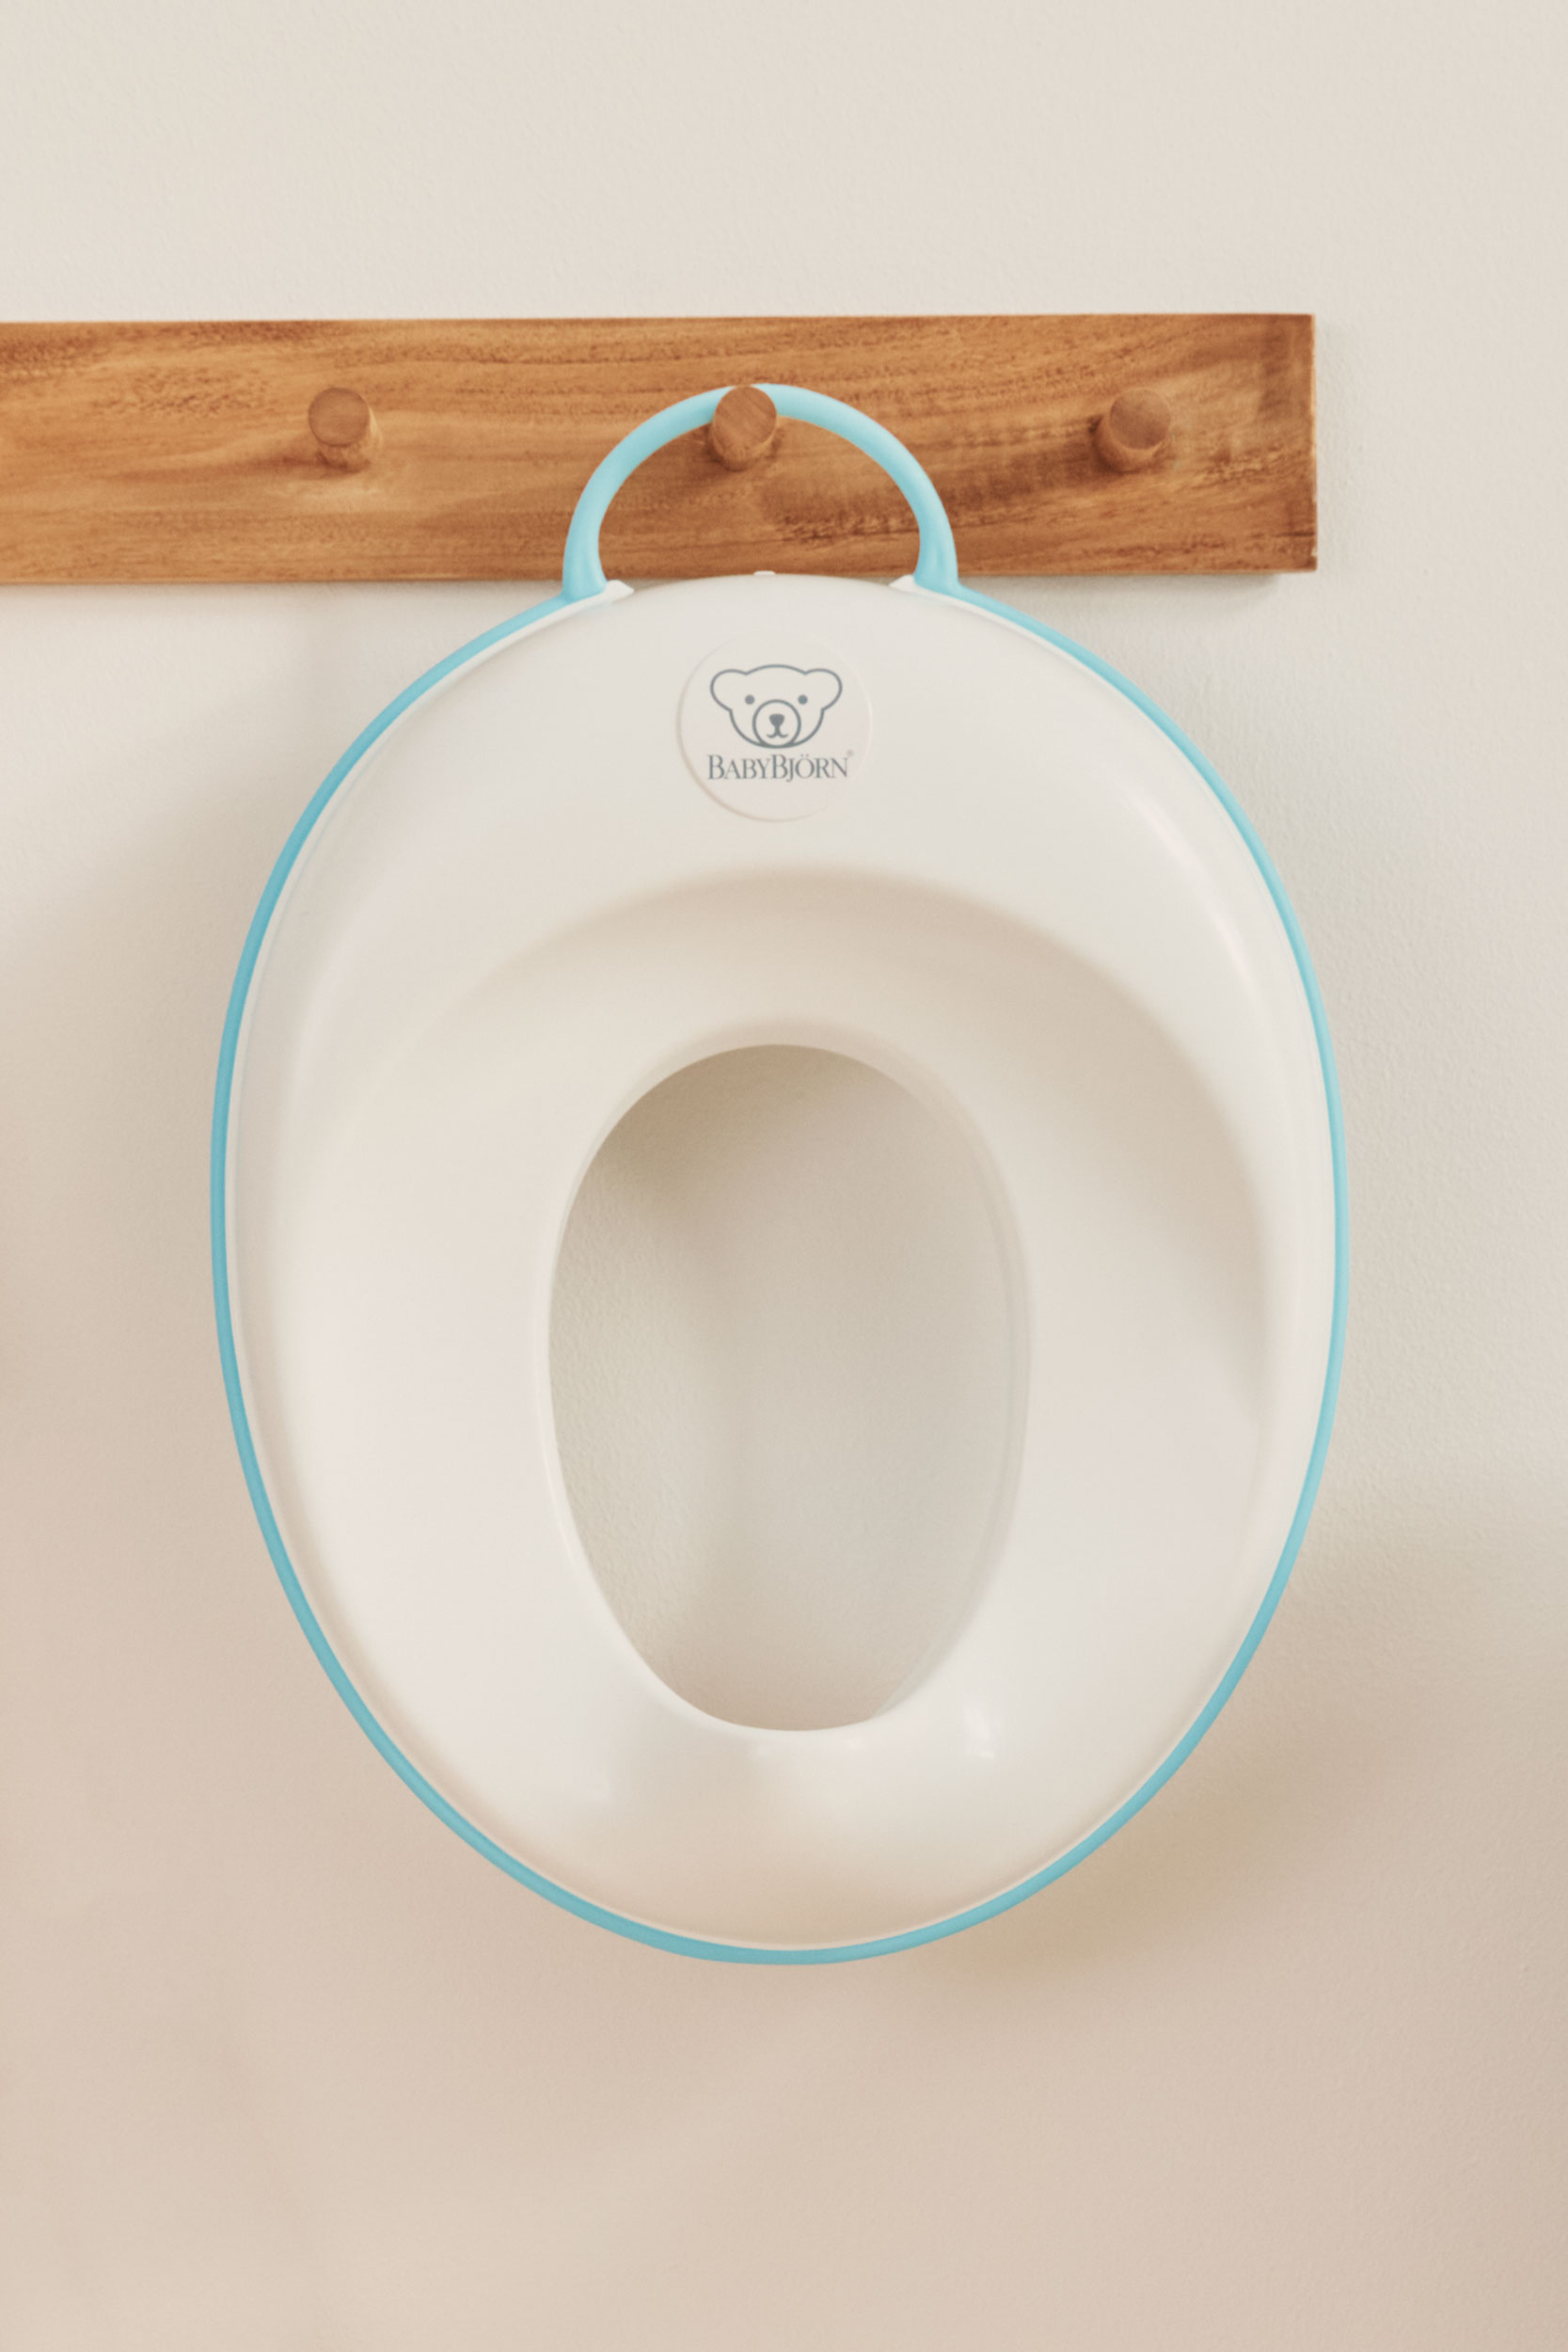 baby bunting toilet training seat Toilet seat training potty smart babybjorn bathroom turquoise trainer colors babybjörn